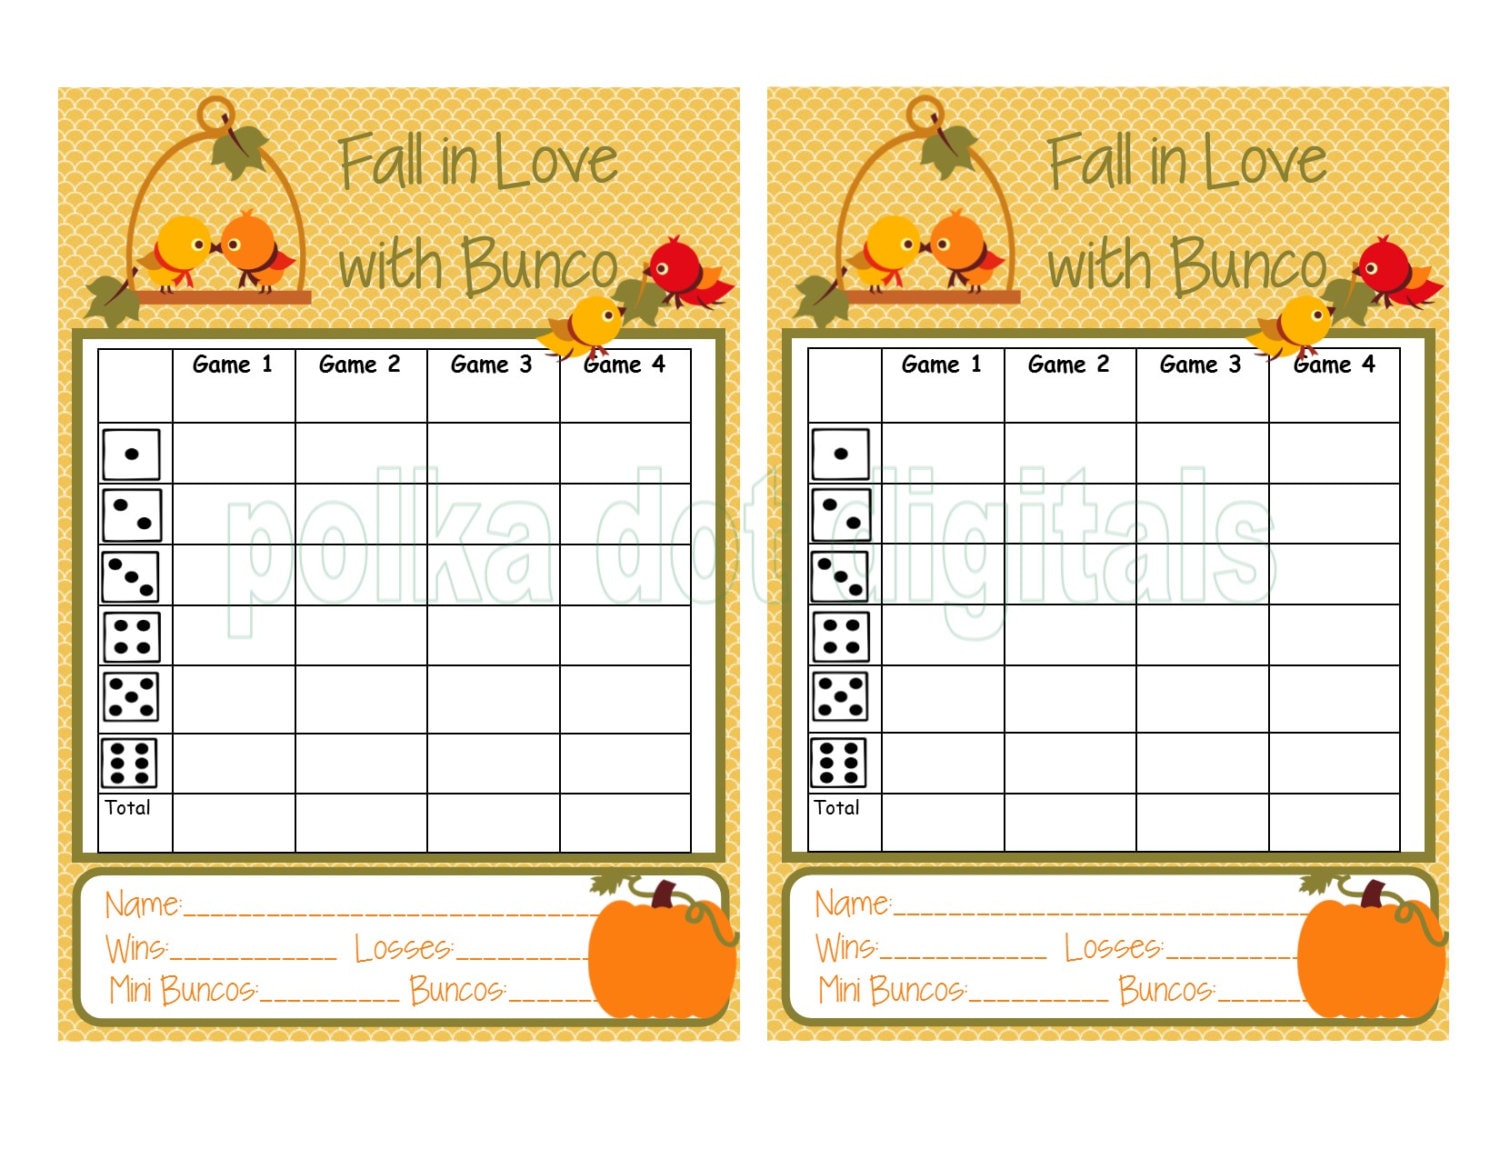 buy-1-get-1-free-complete-set-fall-in-love-with-bunco-score